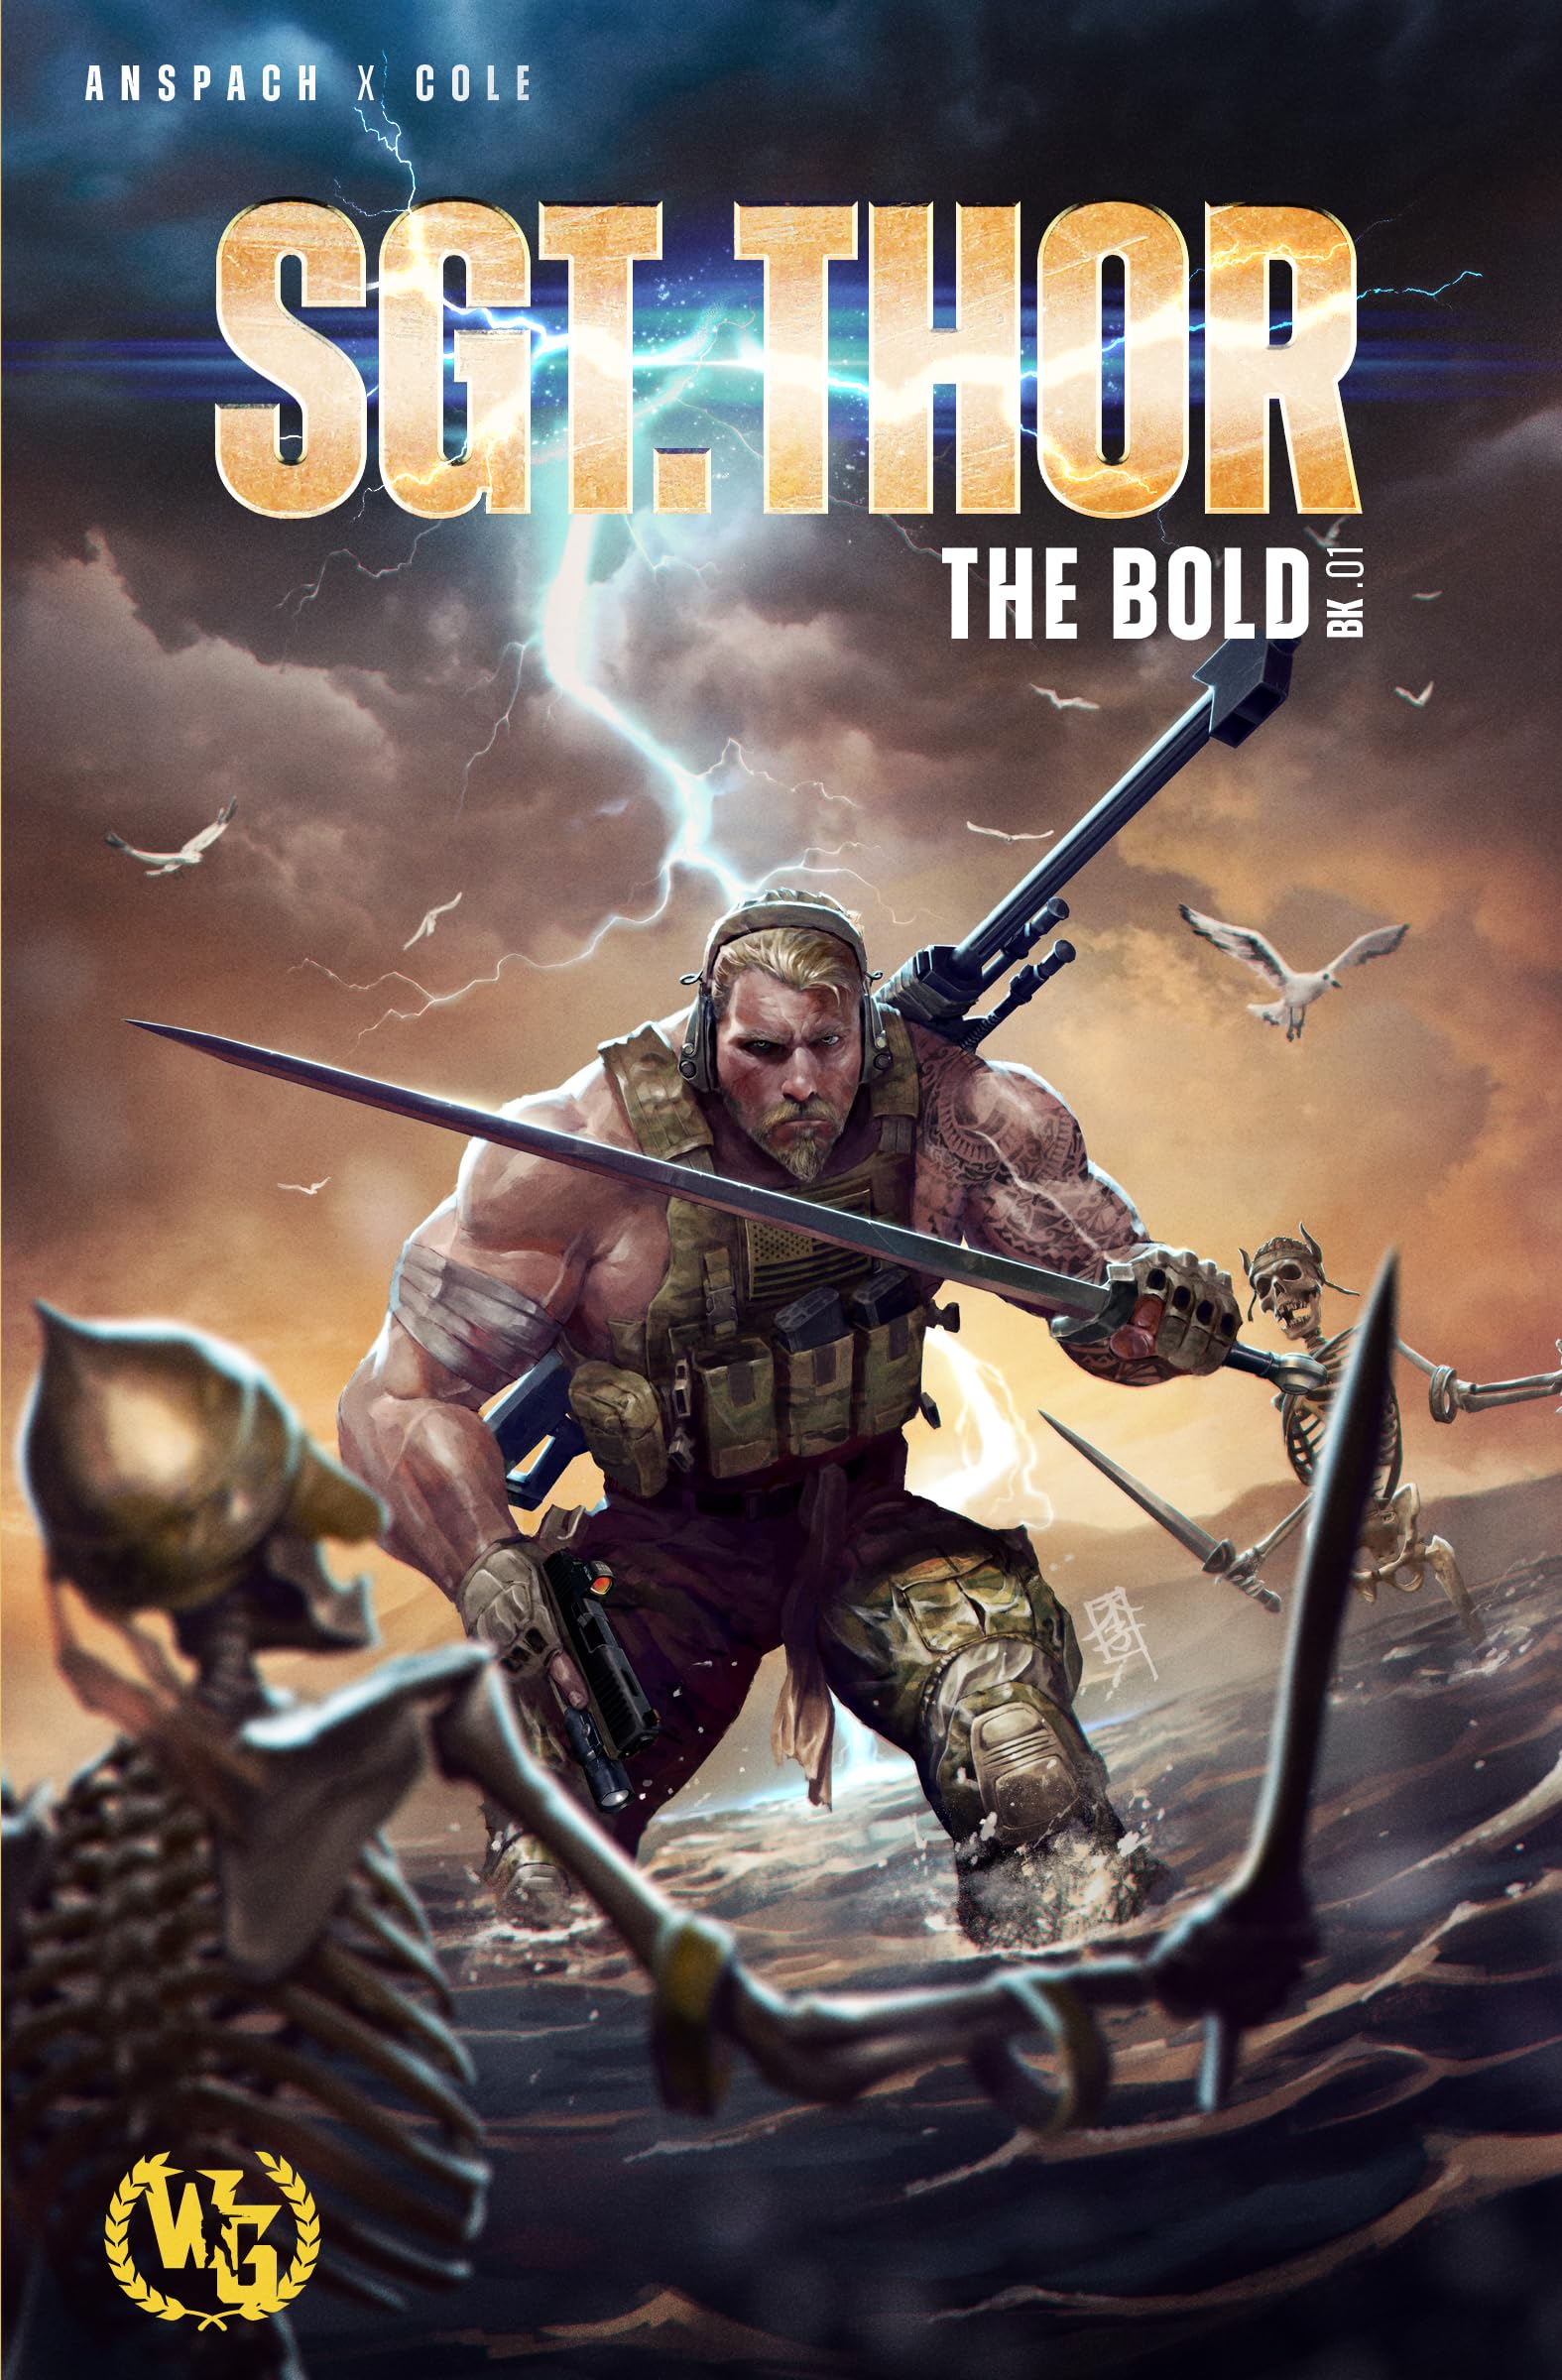 SGT. THOR the Bold: A Military Fantasy Adventure